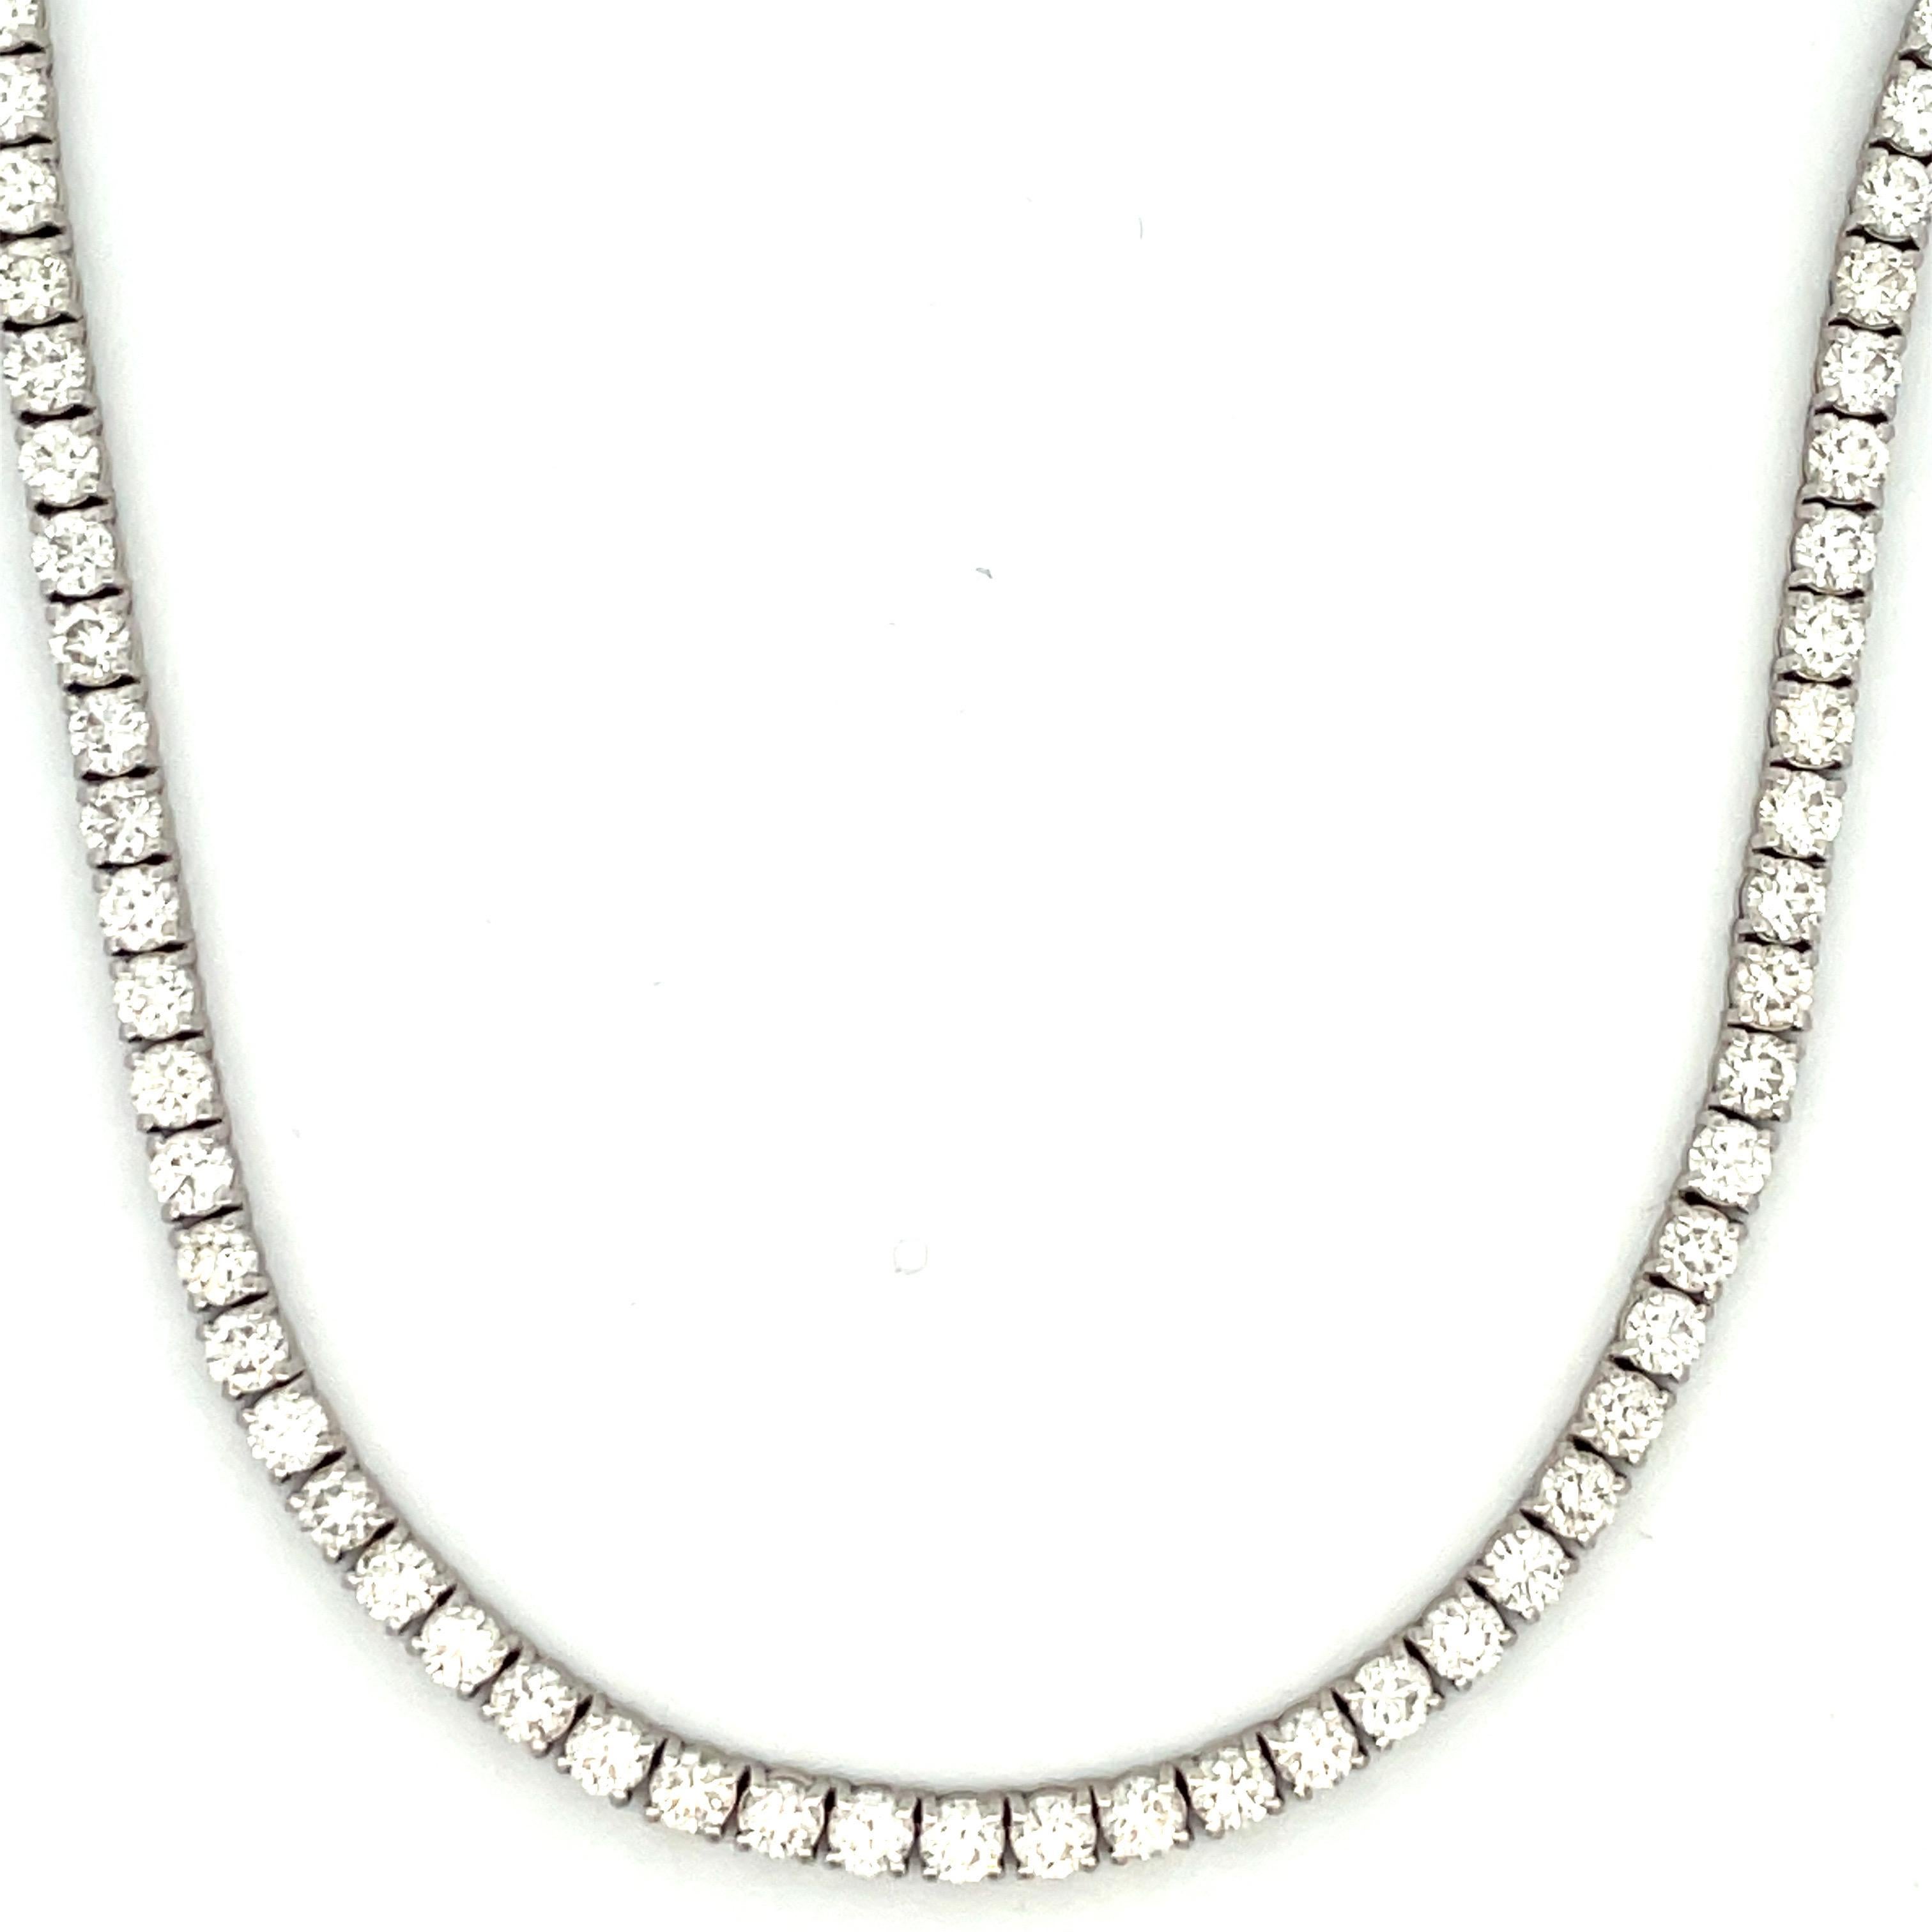 Diamond straight line necklace featuring 113 round brilliant weighing 17.25 ct, in 14 karat white gold.
Color G-H
Clarity SI1-2
Average stones 0.15 pts 

We manufacture Straight line & Riviere Necklaces
Sizes Range 1 -26 Carats
Can customize any